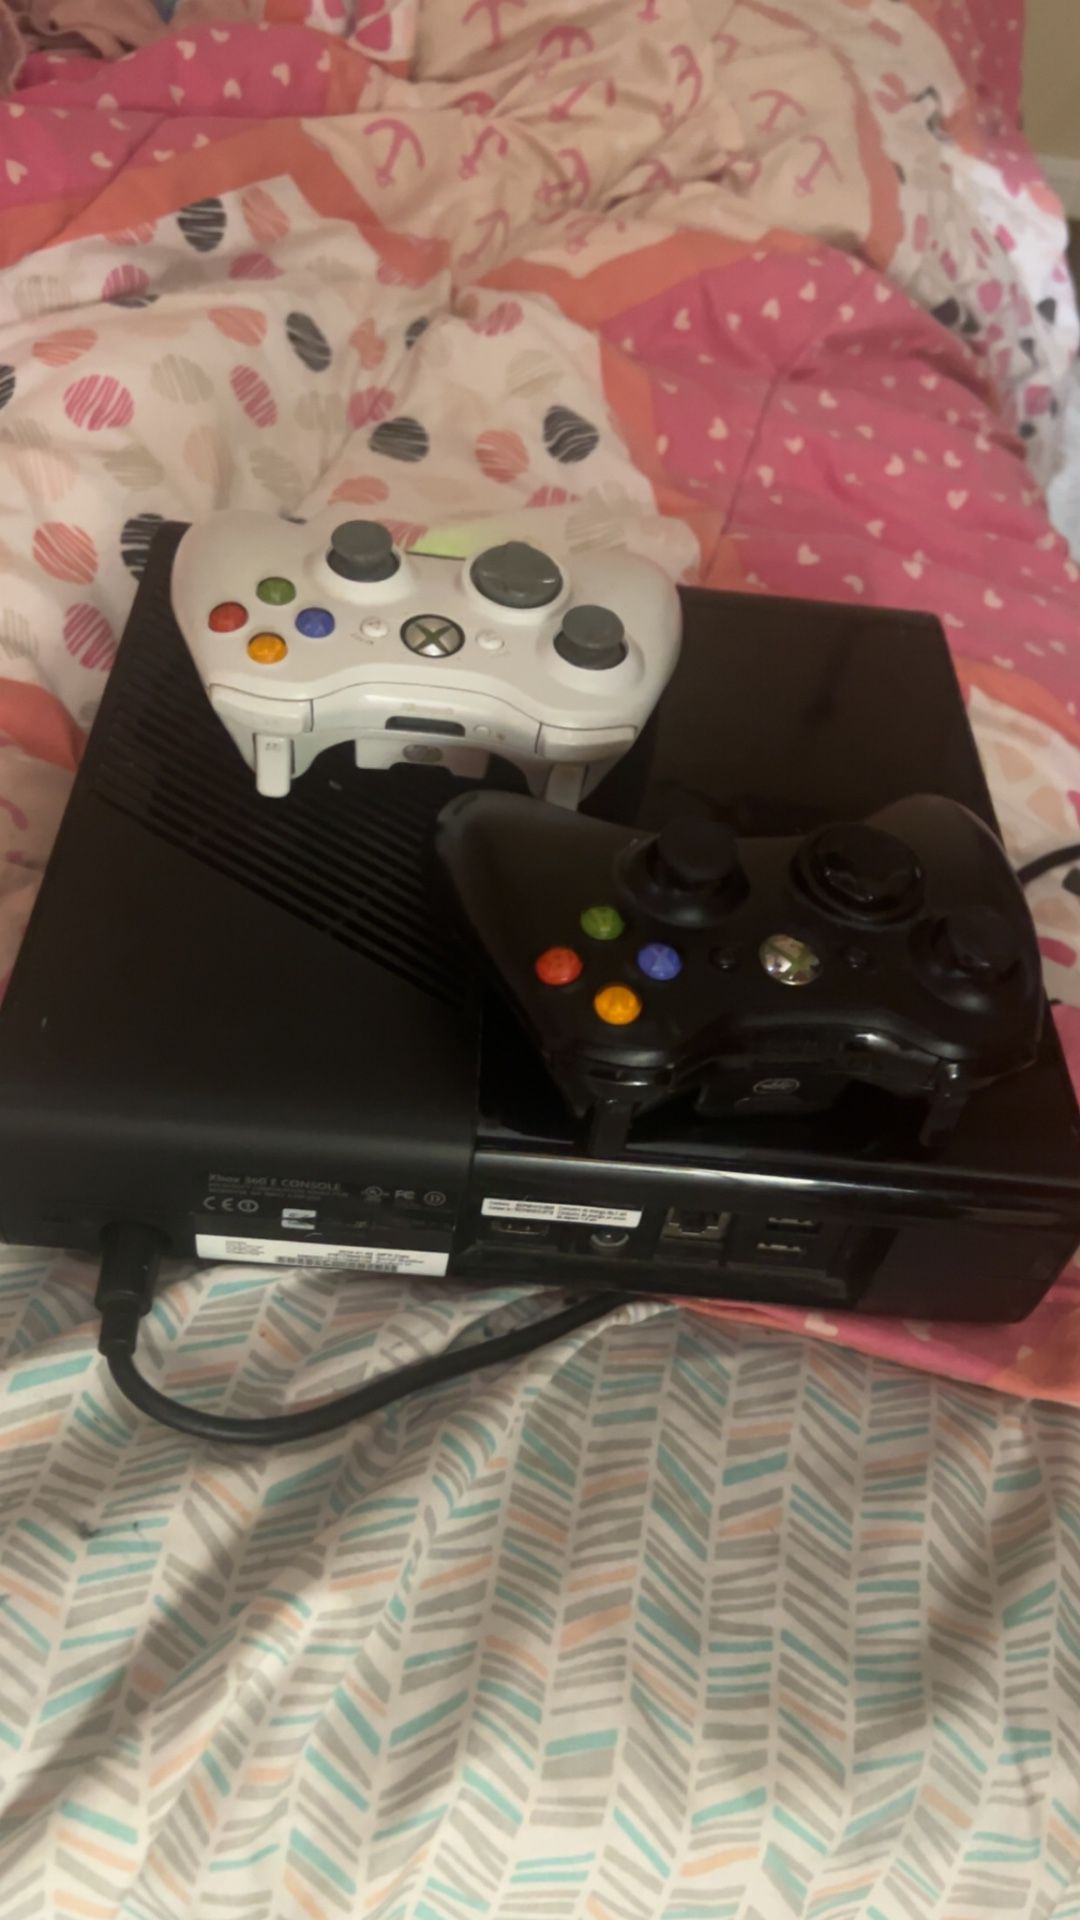 Modded xbox 360 with ncaaf 14 revamped, all old cod’s, modded gta 5 account, and skate 3